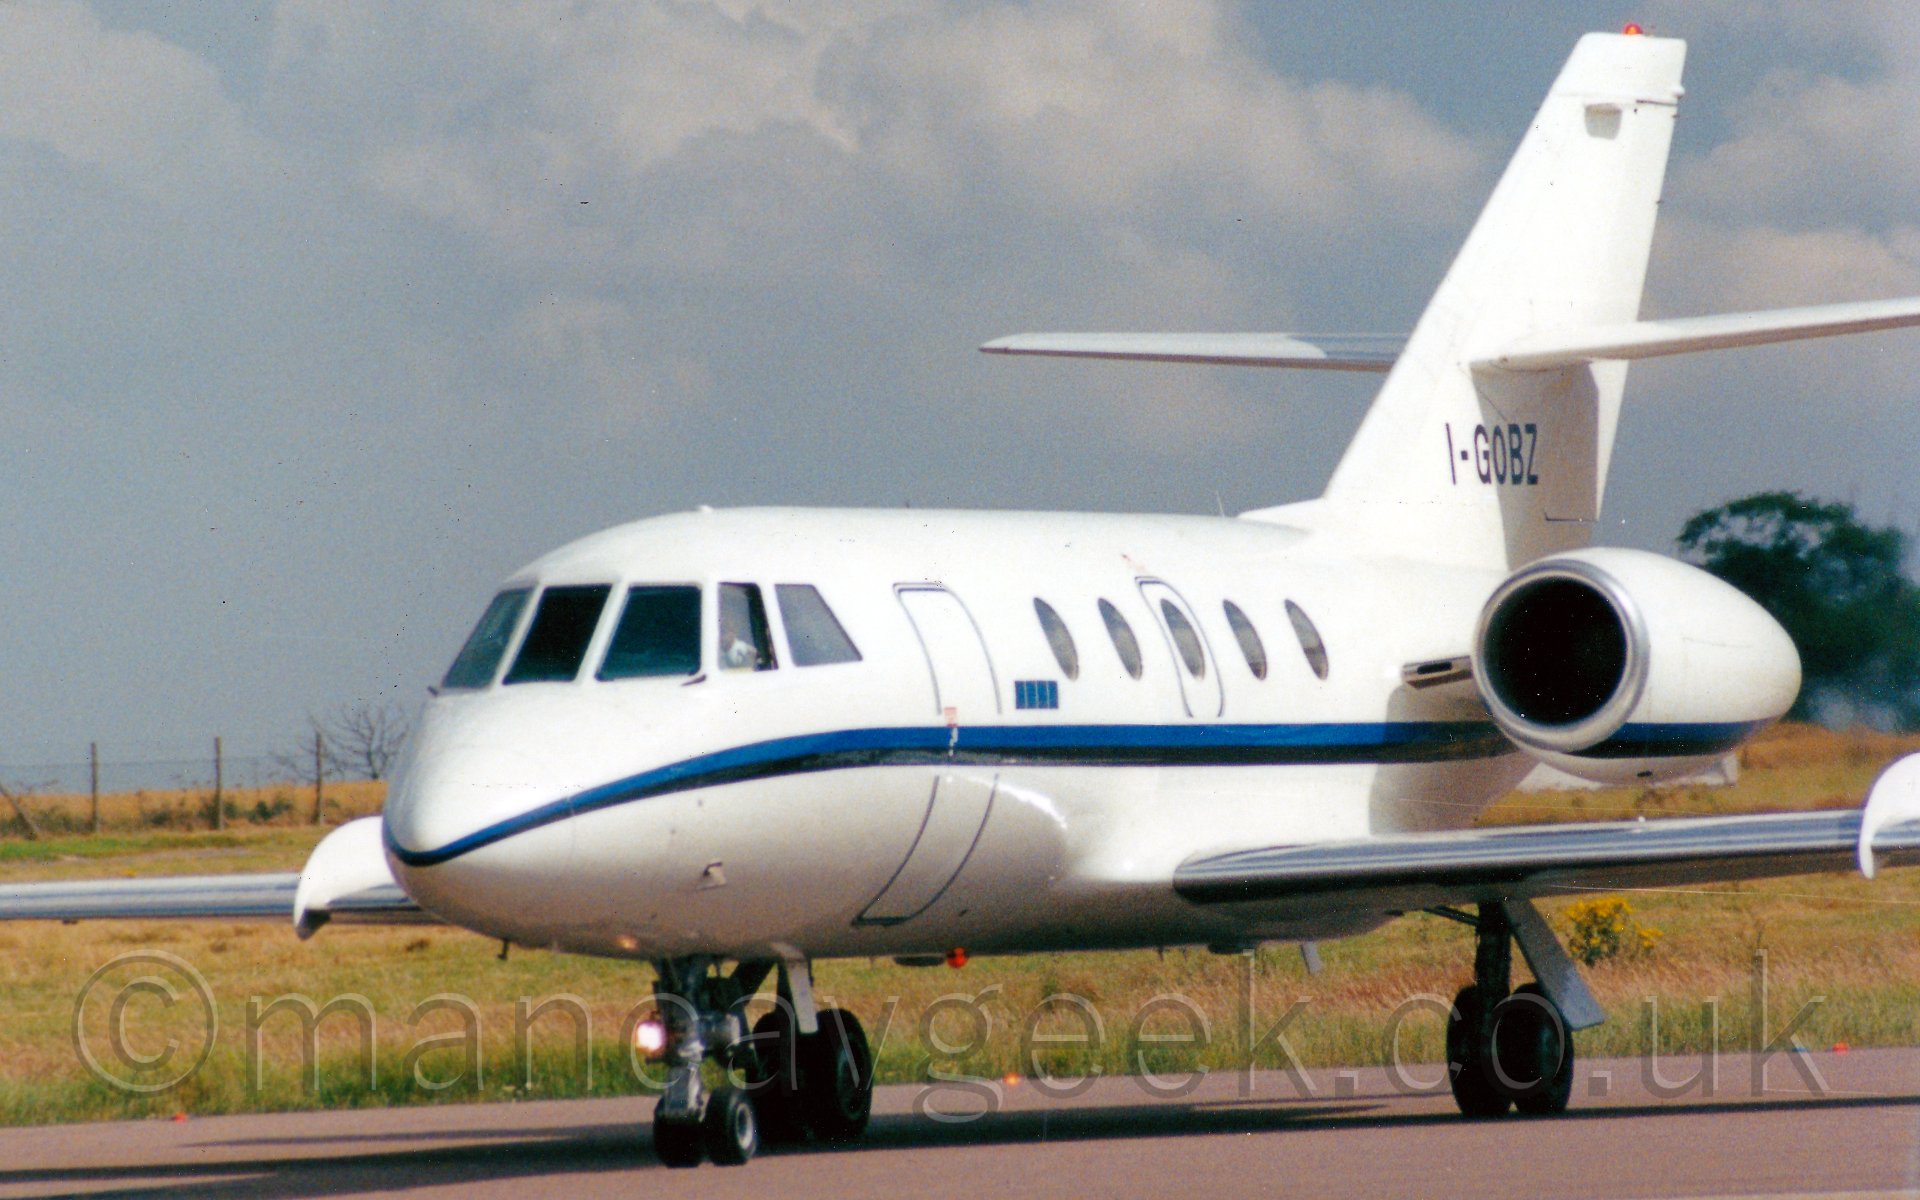 Side view of a twin engined bizjet parked facing to the left, and slightly towards the camera. The plane is almost entirely white, with a thin blue and black stripe running the length of the body, as well as along the bottom of the engine pods. The registration "I-GOBZ" is on the bottom half of the tail in black. In the background, grass runs off to a wire fence on the left of the frame, and trees on the right, under a wispy grey sky with patches of blue threatening to peek through.